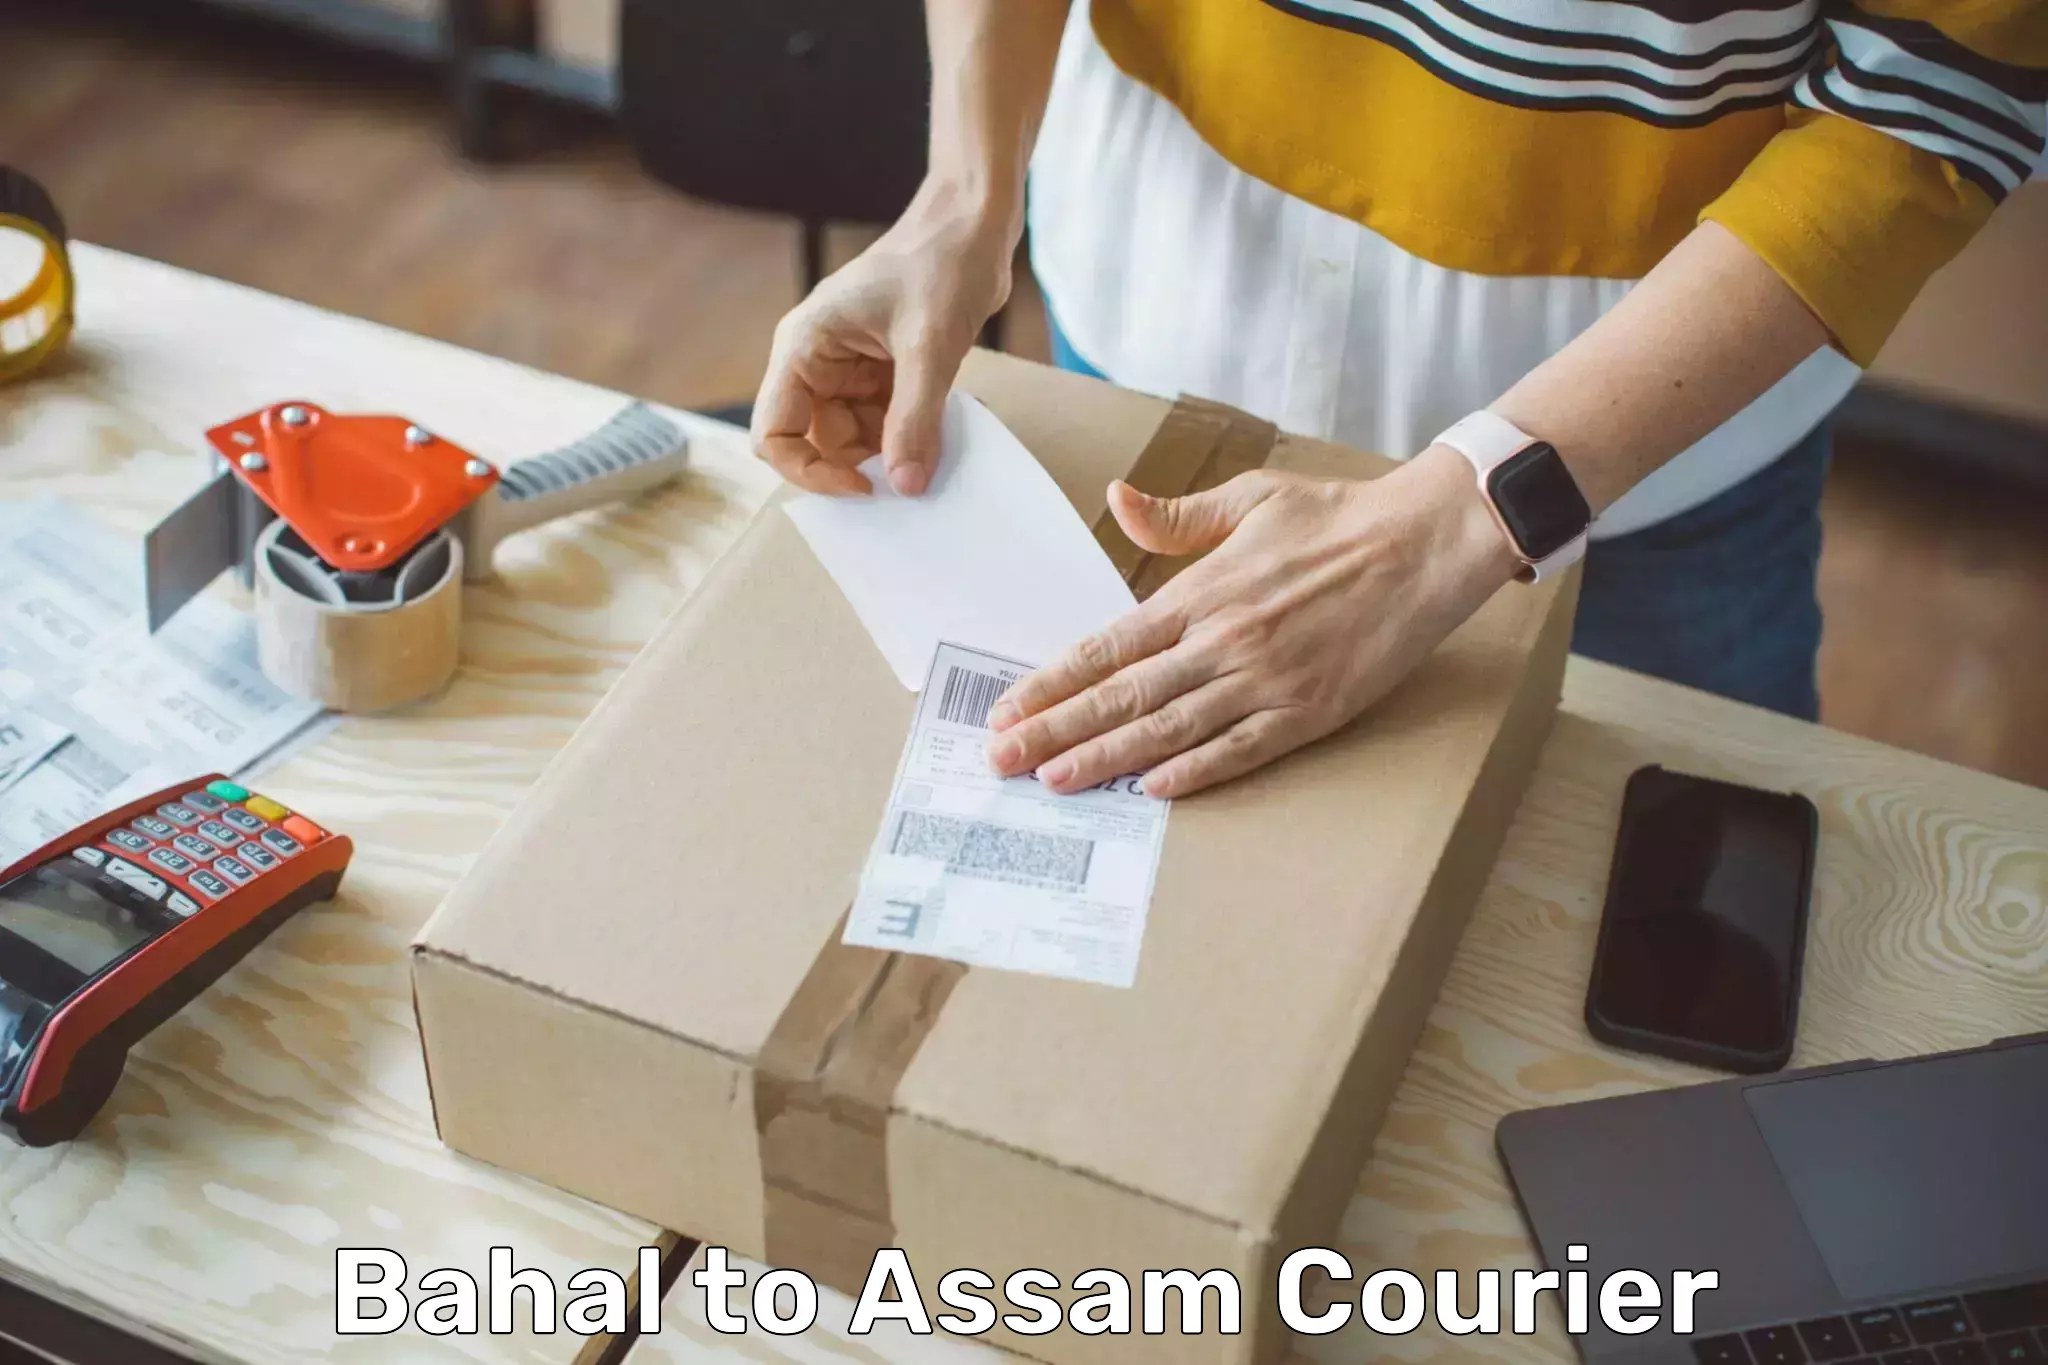 Cross-border shipping in Bahal to Silchar